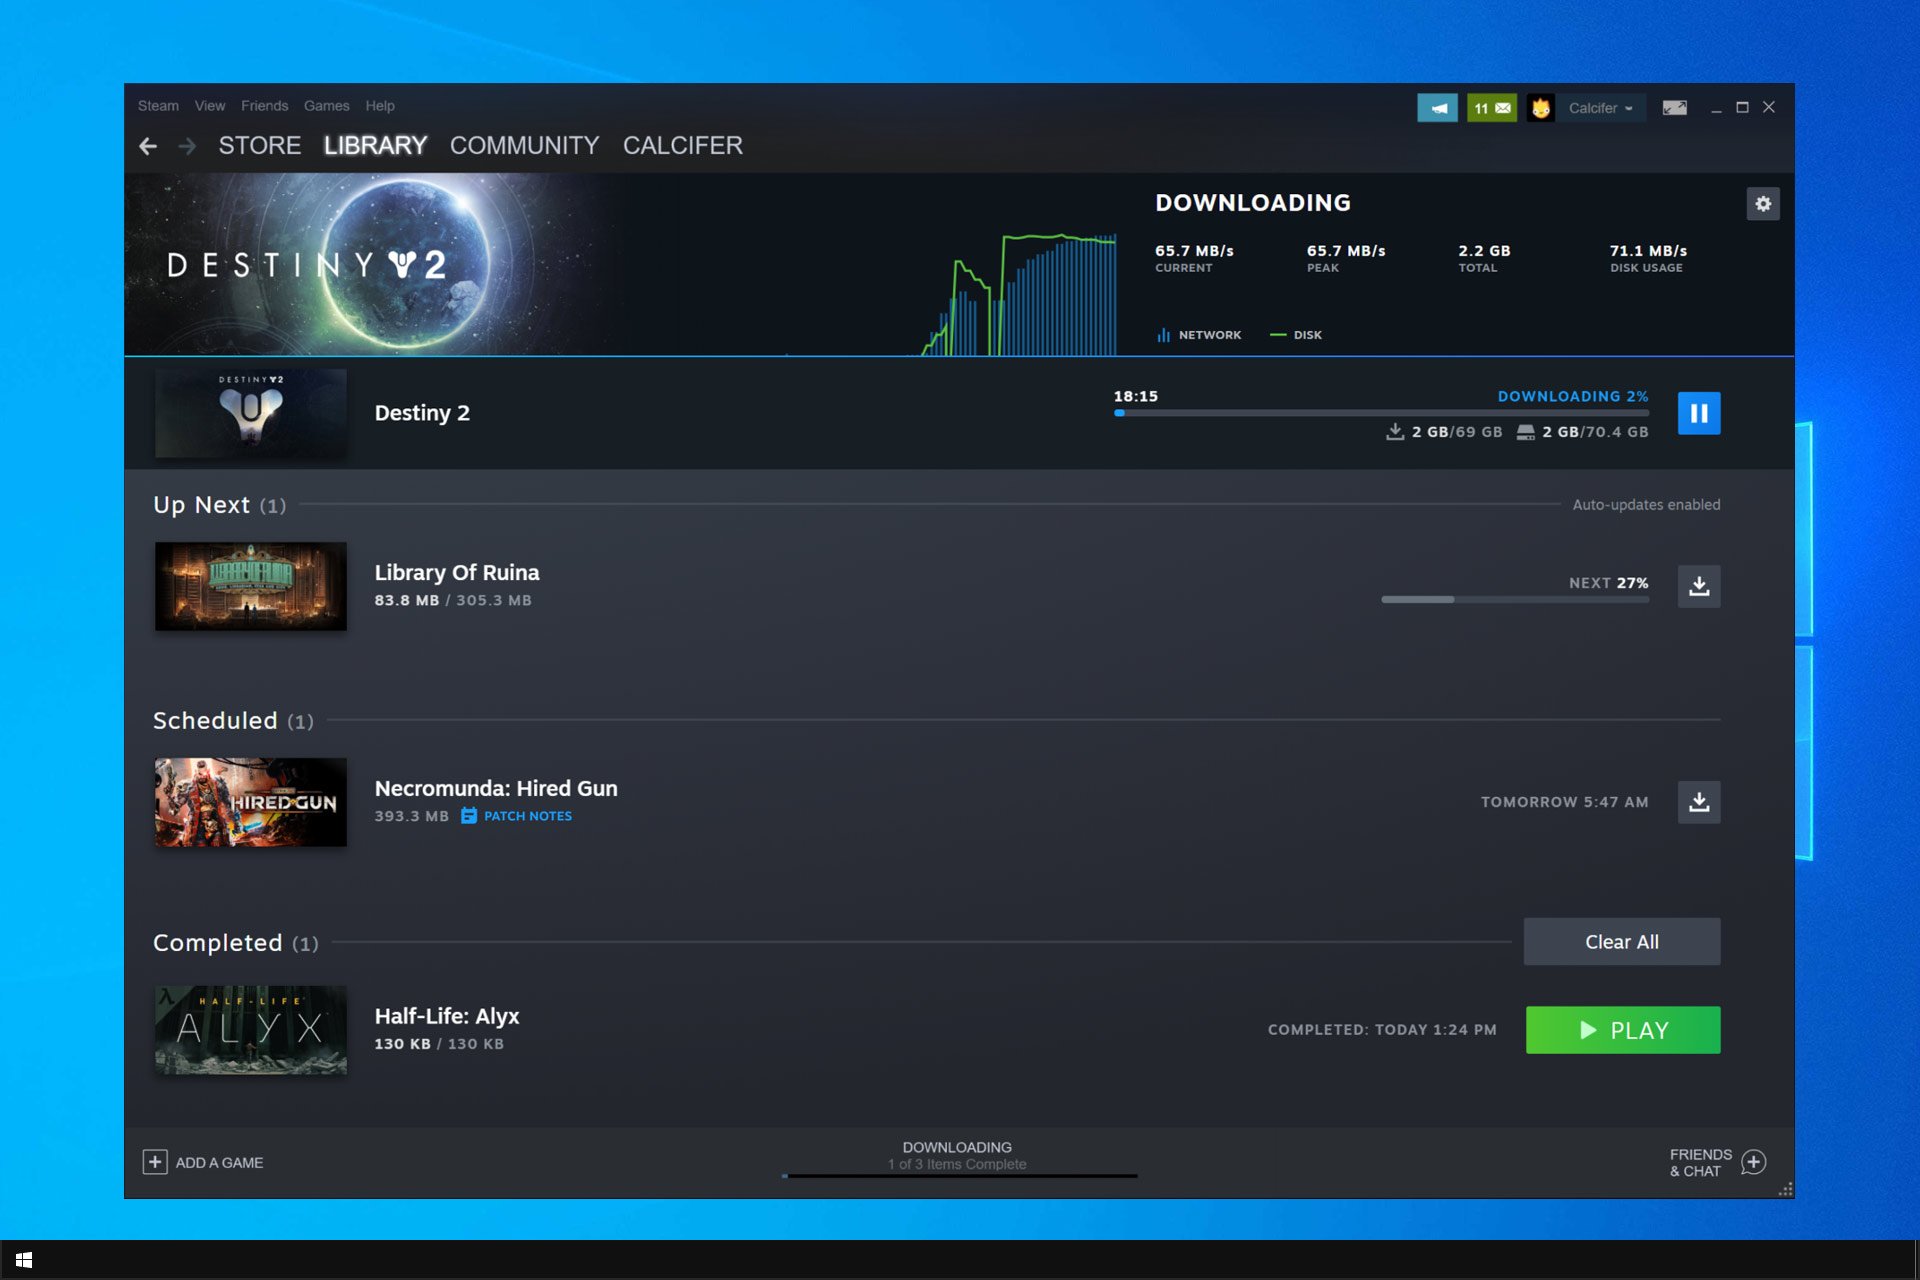 Steam for Mac Client Available for Download, Service Not Yet Active